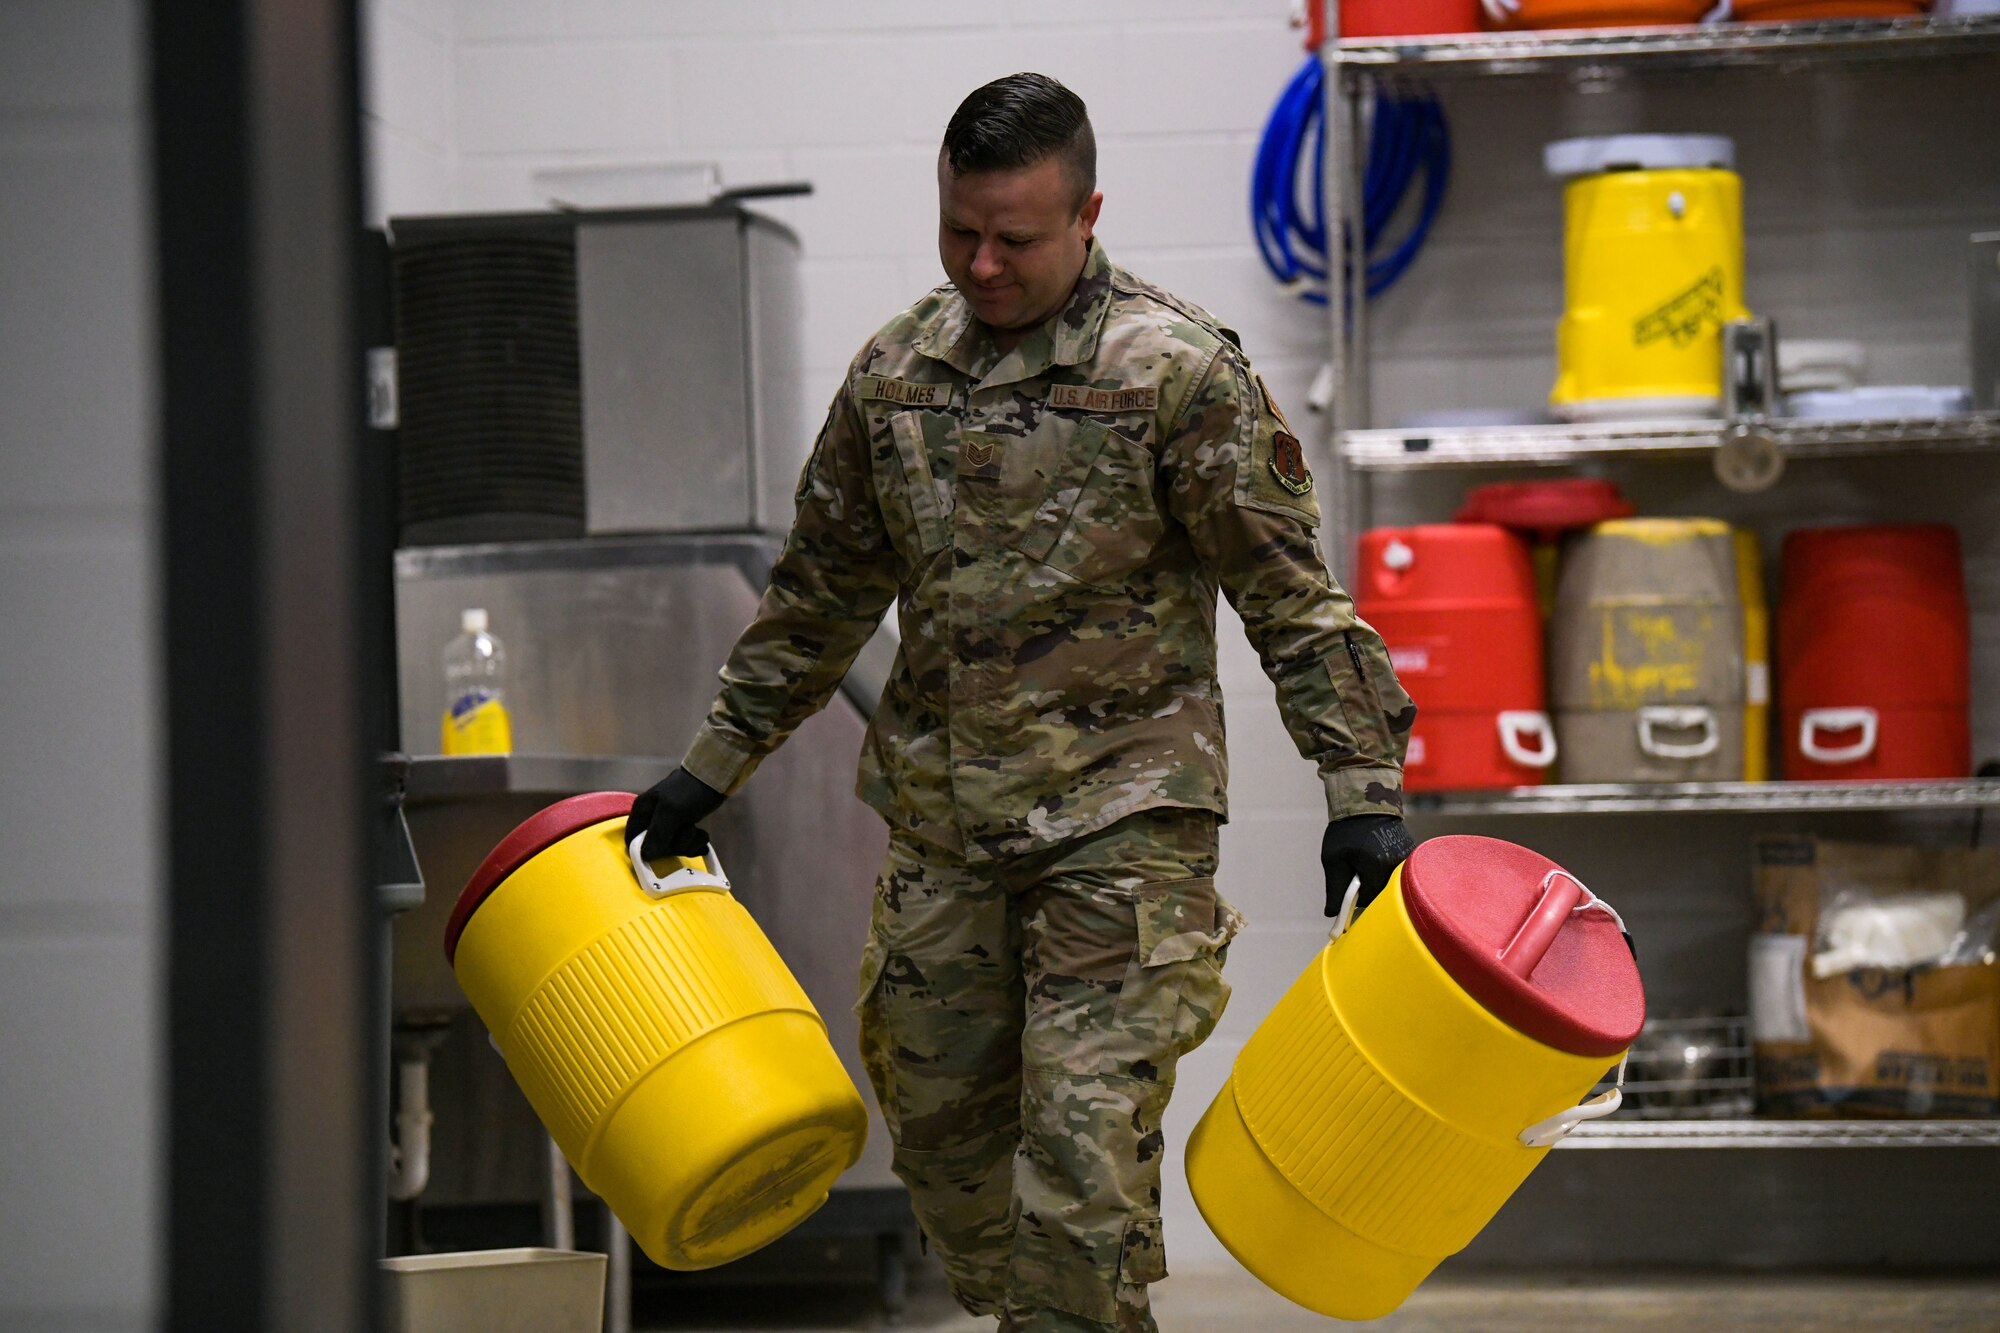 Tech. Sgt. Adam Holmes, an air transportation specialist with the 172nd Logistic Readiness Squadron, organizes his aerial port work area before inspecting equipment used to load a C-17 Globemaster III. Holmes, a volunteer firefighter known for his leadership and selfless service, recently applied his skillset and servant mentality to assist a stranded driver when no one else would. (U.S. Air National Guard photo by Staff Sgt. Jared Bounds.)

LEAVE A COMMENT
IMAGE INFO